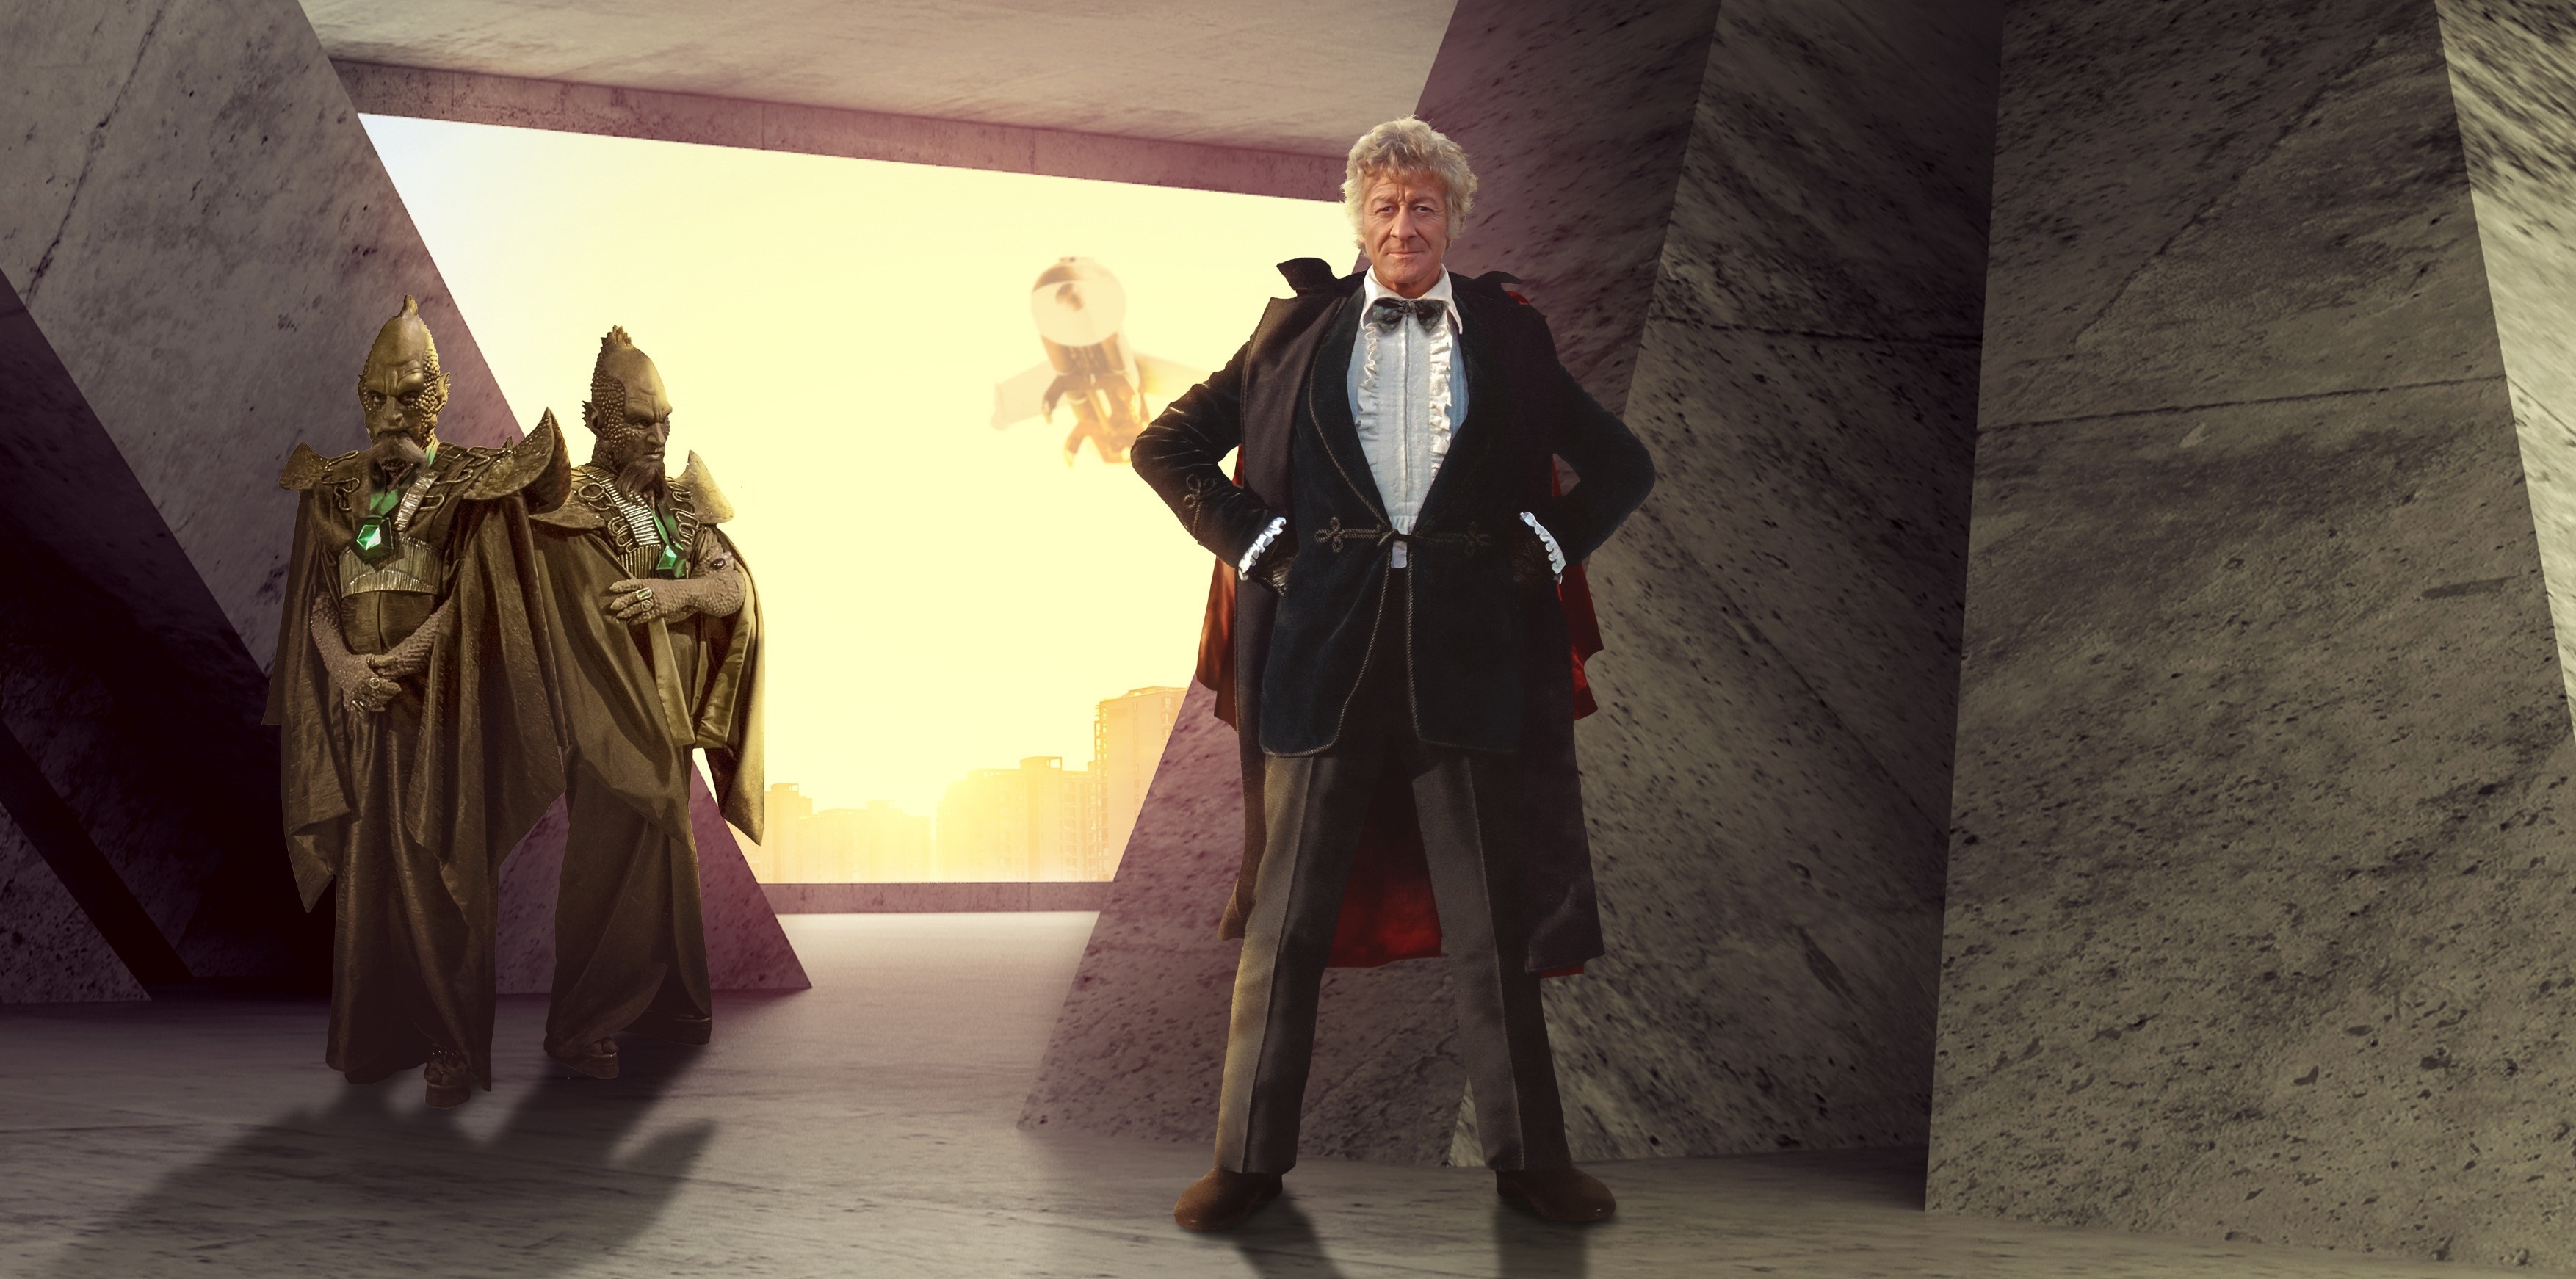 the third doctor often accompanied his use of venusian aikido with cries of “hiii-ya!” and “hee-yaw!”. the doctor has yet to continue this habit…